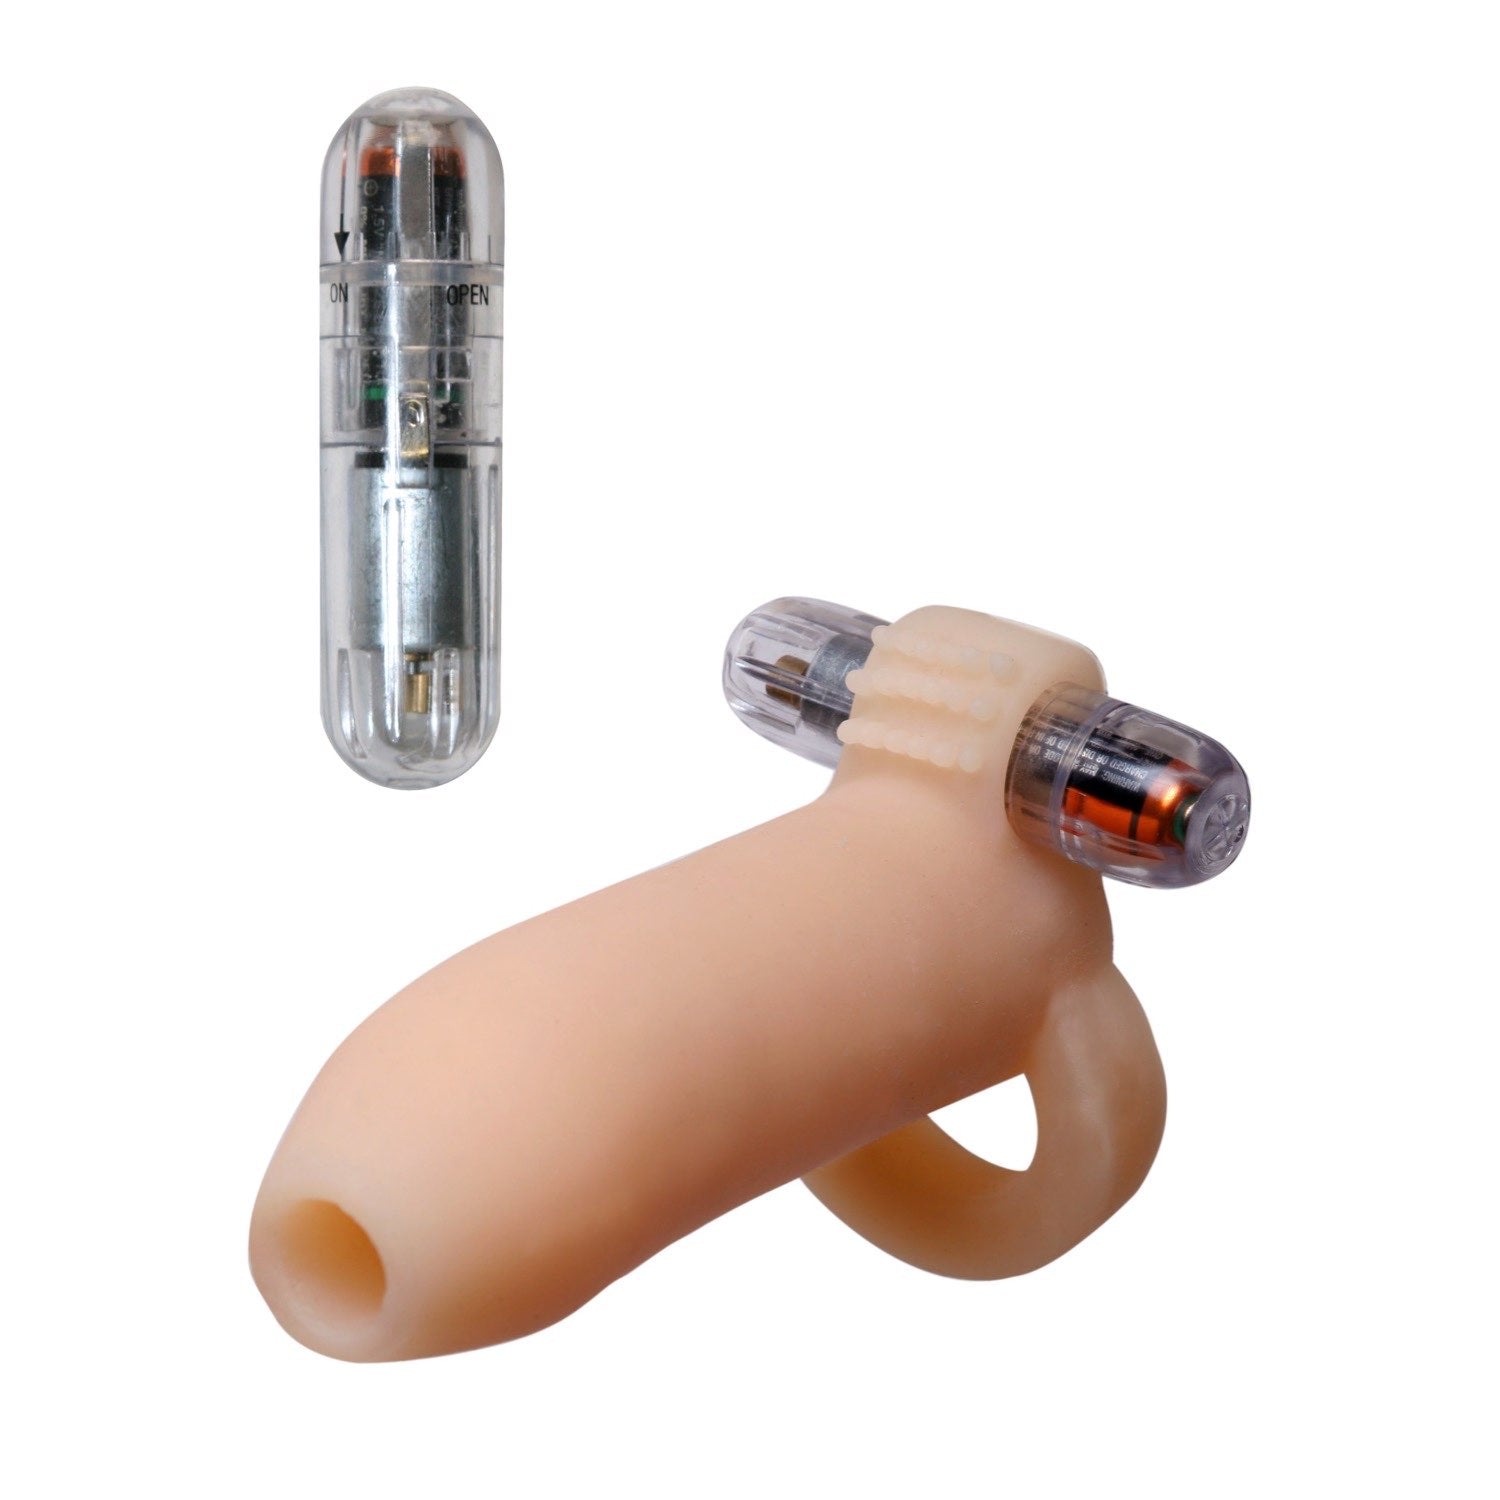  Real Feel Penis Enhancer - Flesh Vibrating Penis Attachment and Ball Ring by Pipedream